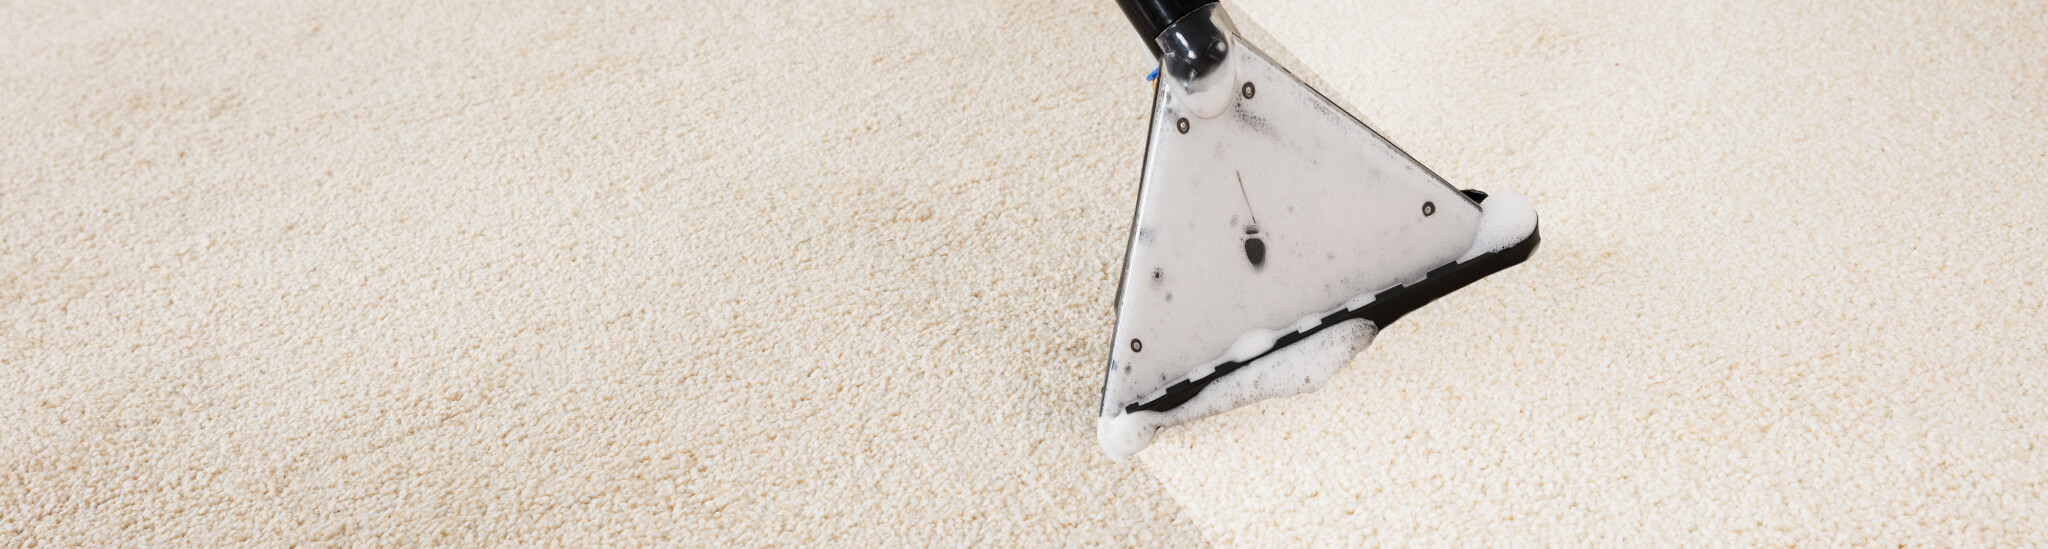 Close-up Of A Person Cleaning Carpet With Vacuum Cleaner